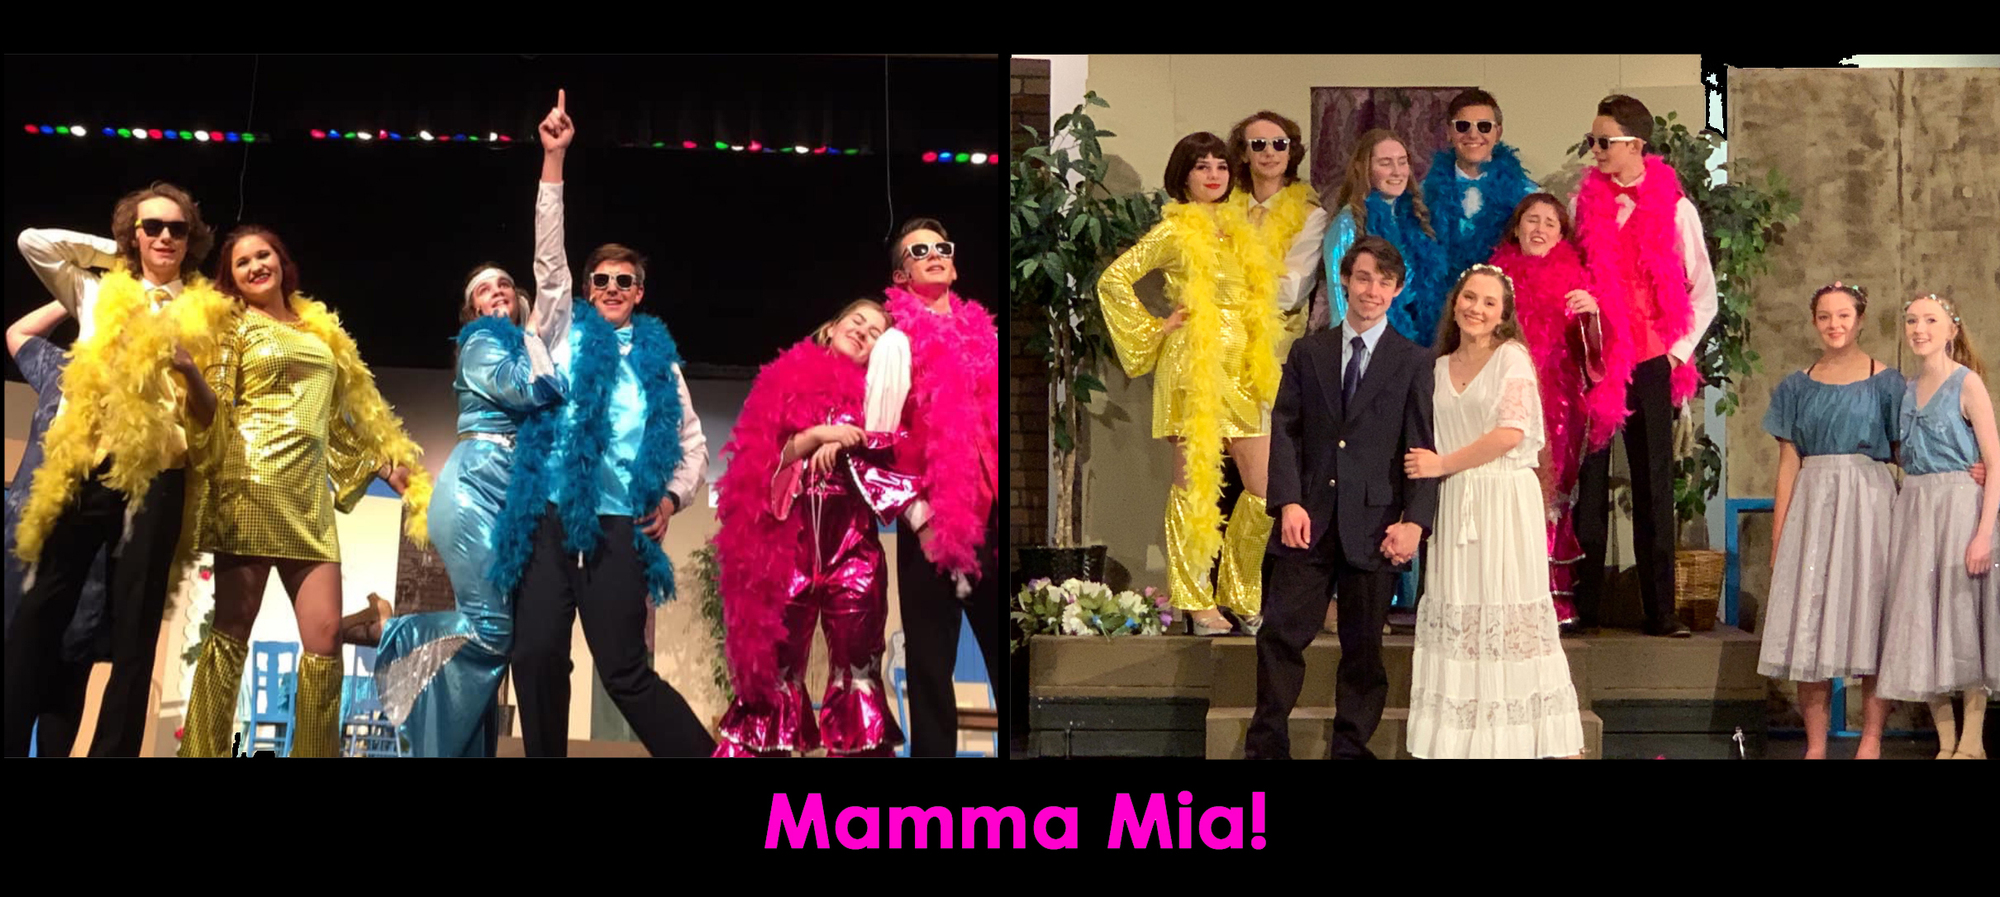 Cast members from the musical mamma mia posing.